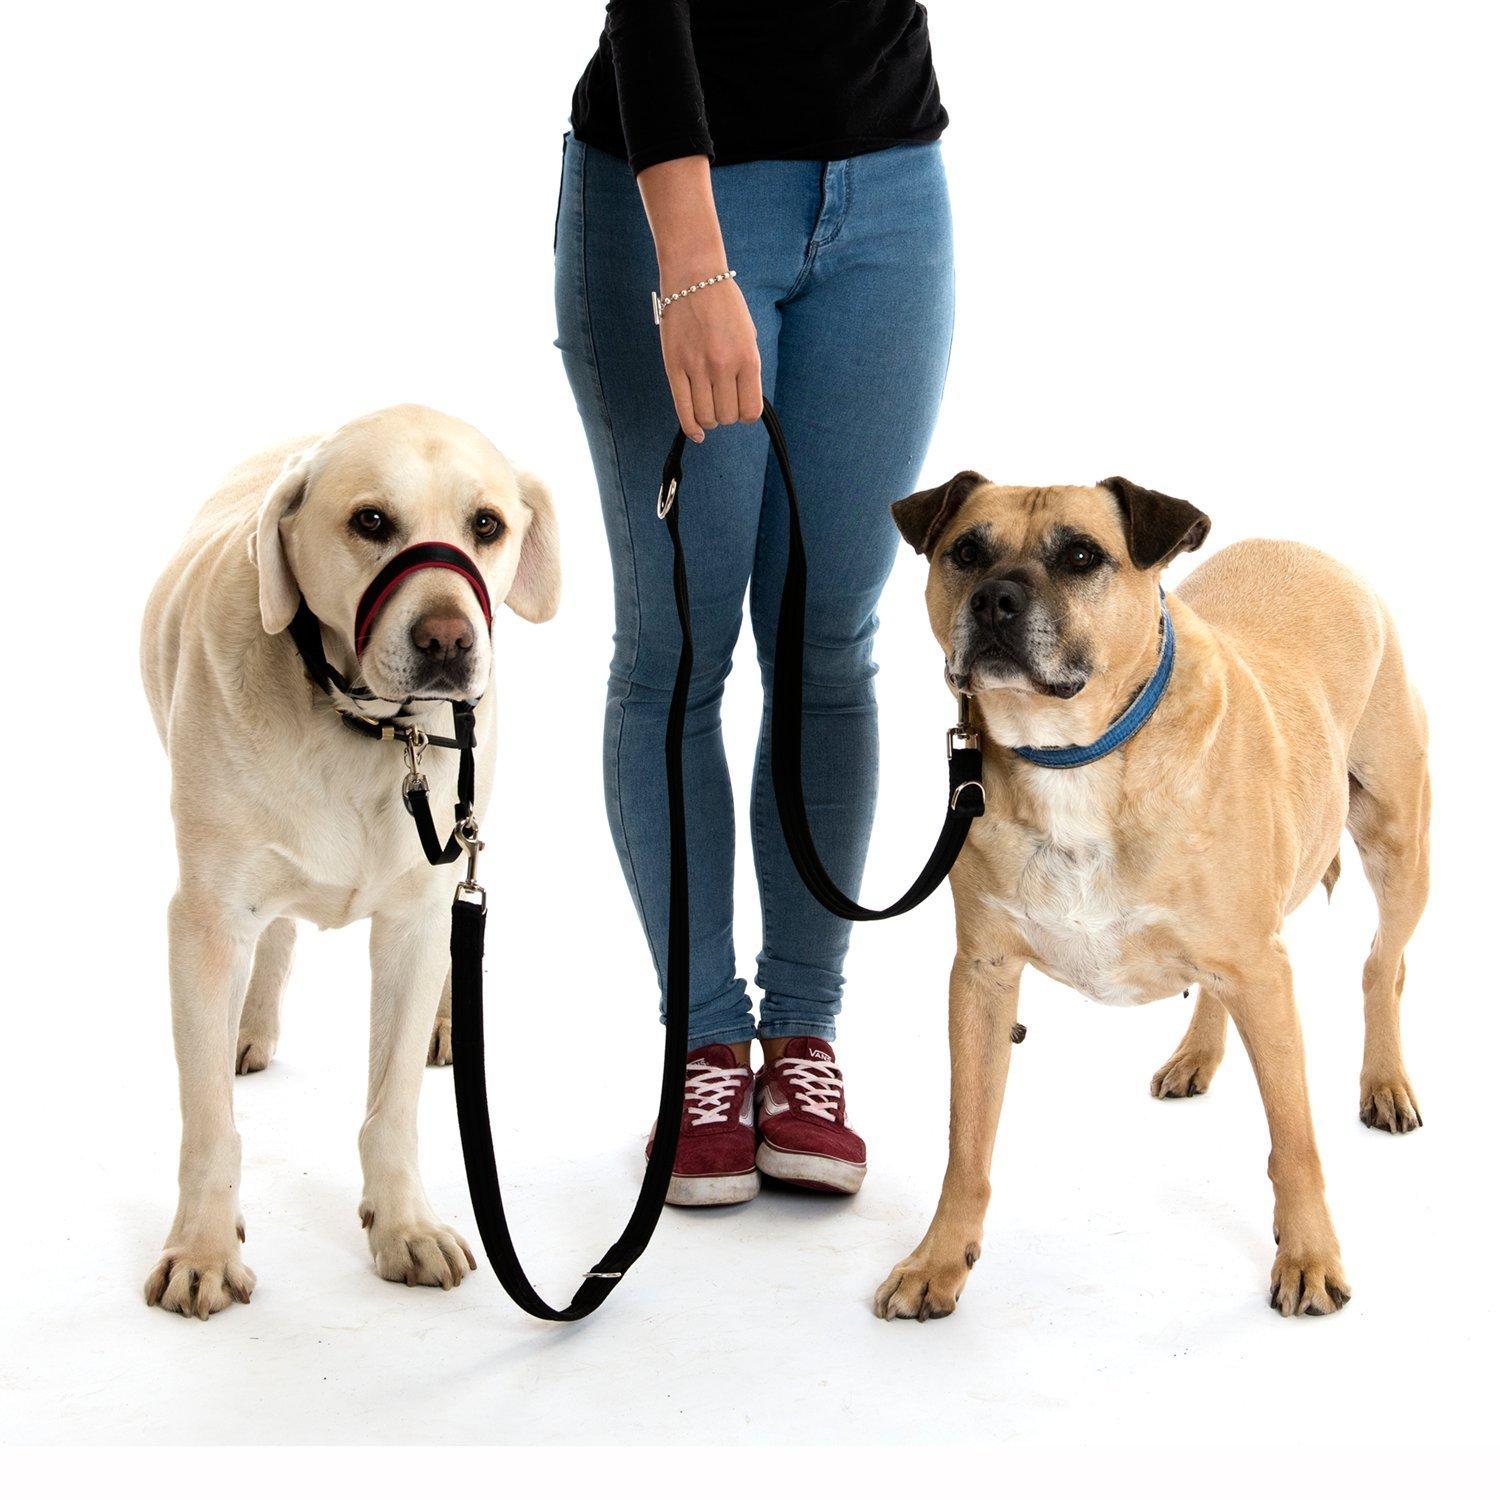 Halti Training Lead For Dogs for 2 dogs